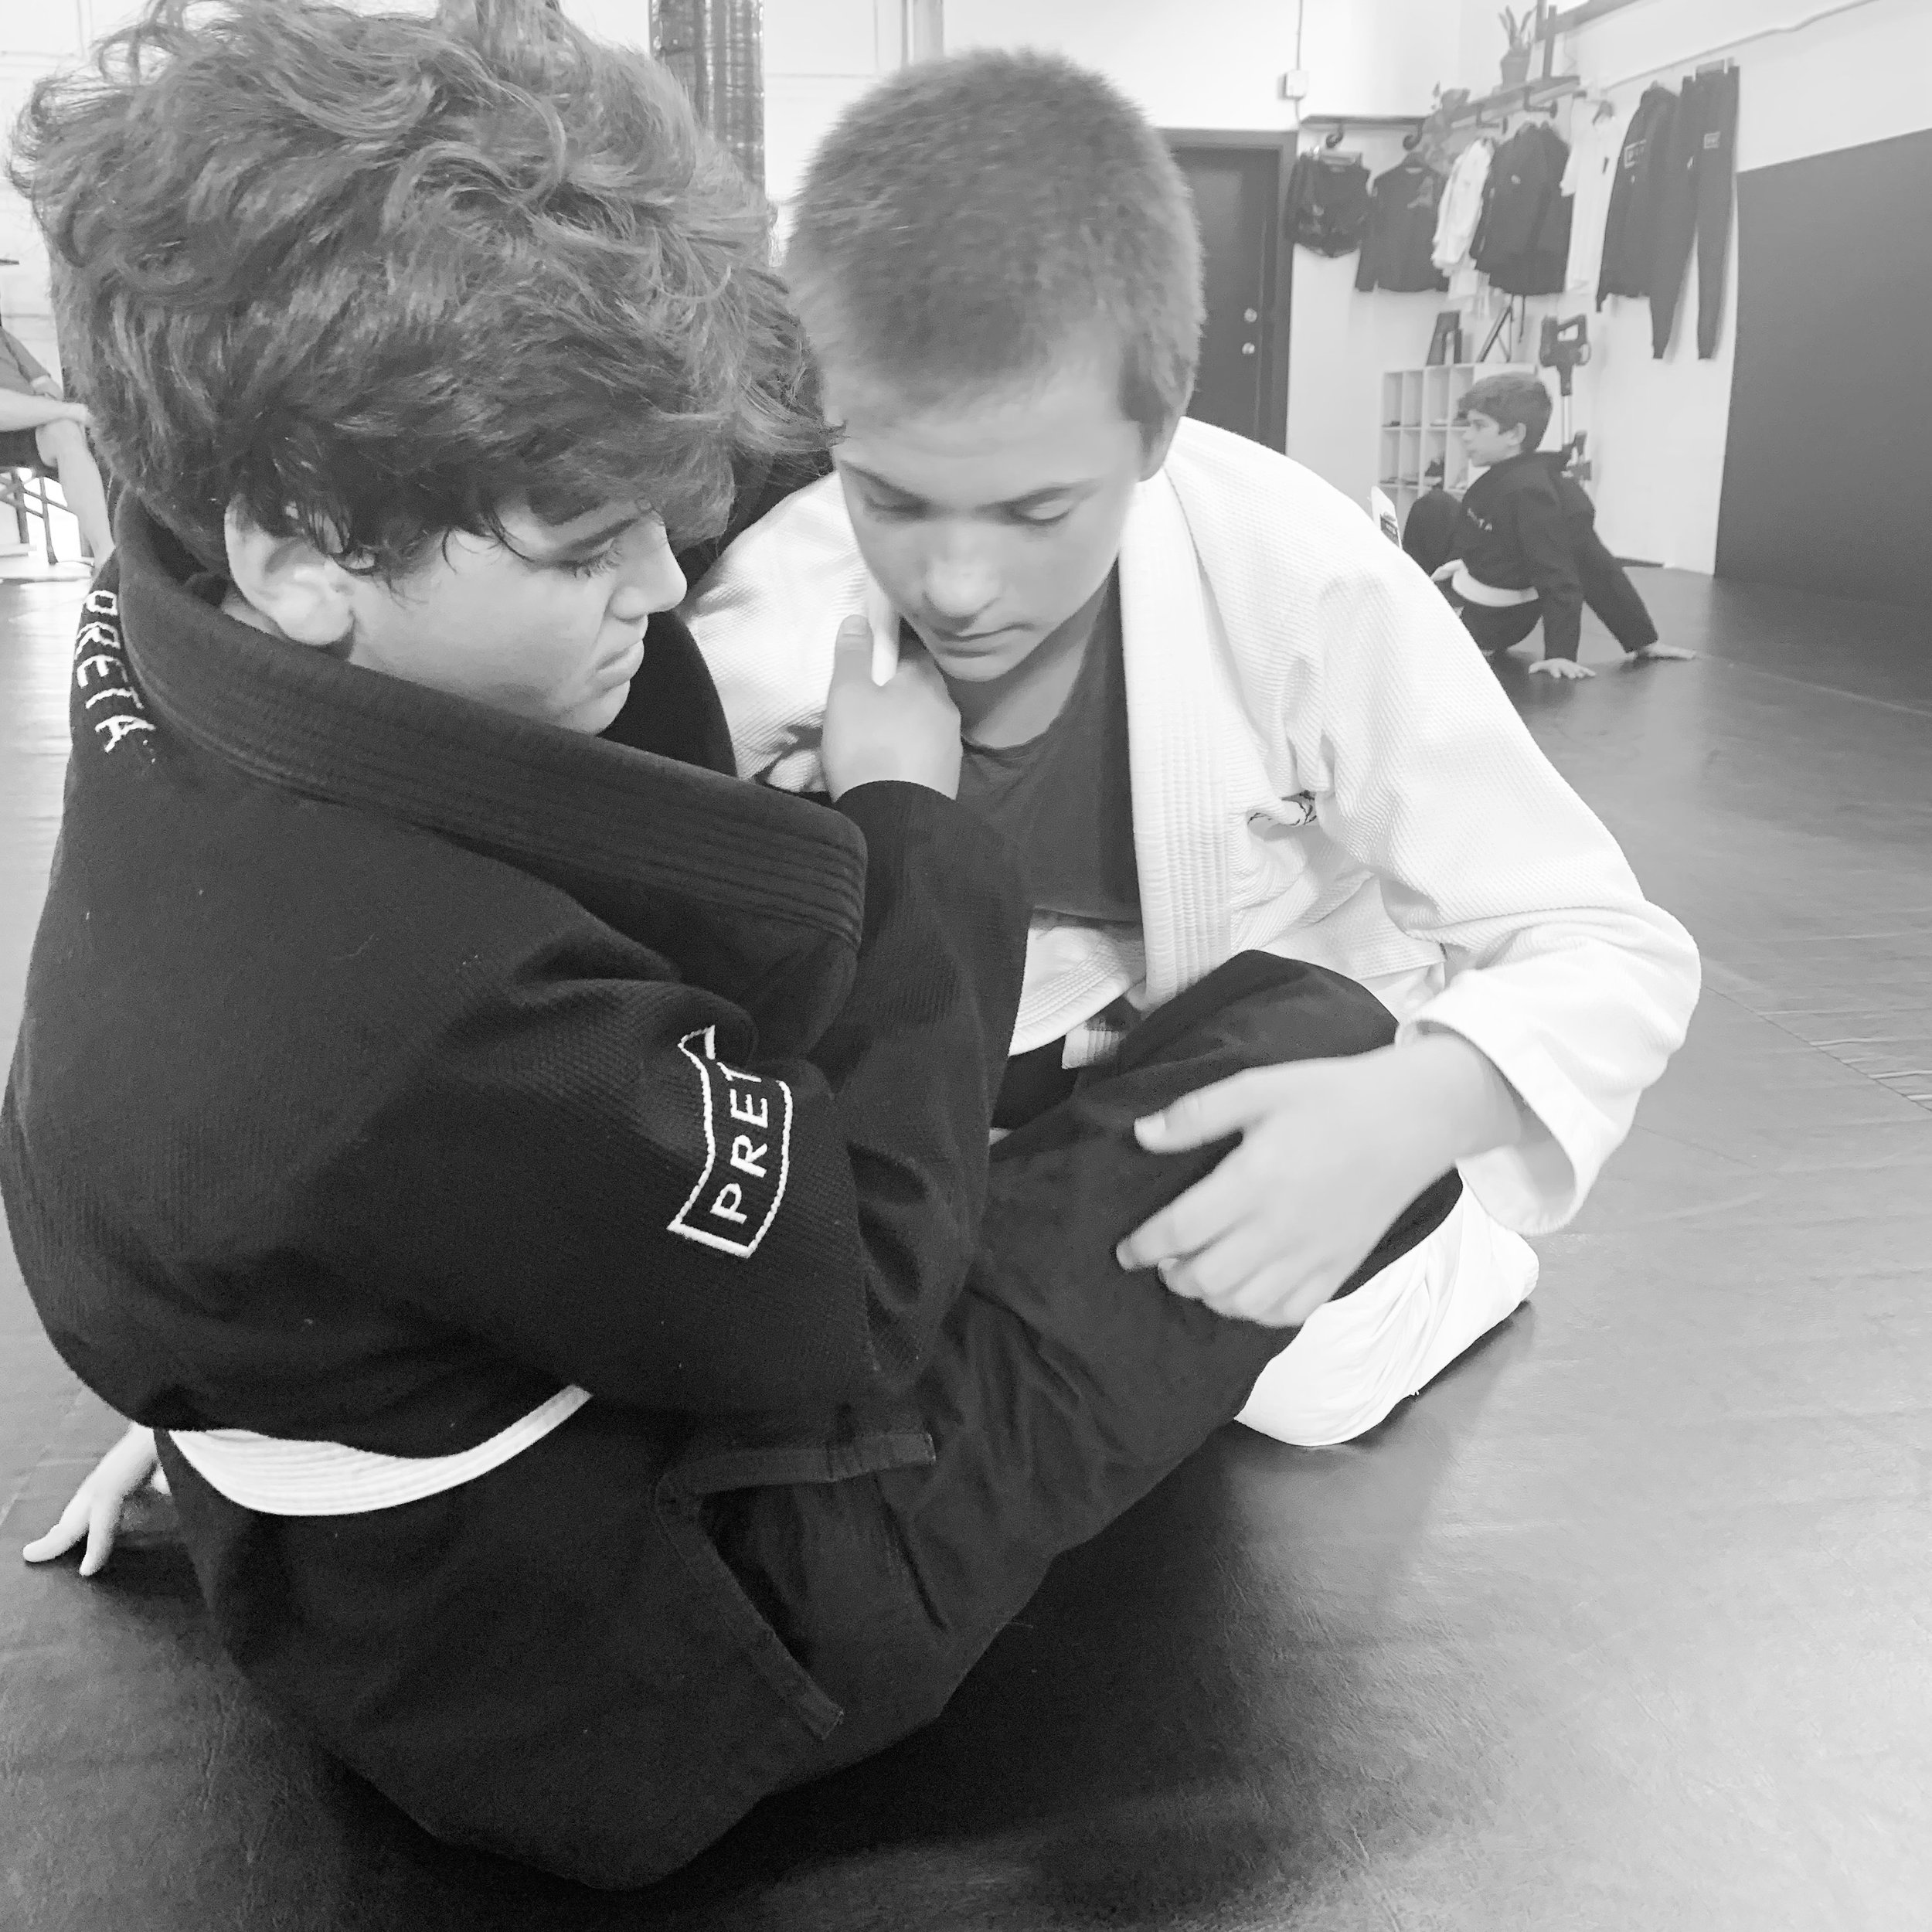 😁Preta Kids Gi Jiu Jitsu 

📆Tuesdays &amp; Thursdays @ 5pm

🧠If you are interested in your children developing life long skills and friendships in a team building environment, come try a free class!

🆓trial available via the website linked in the